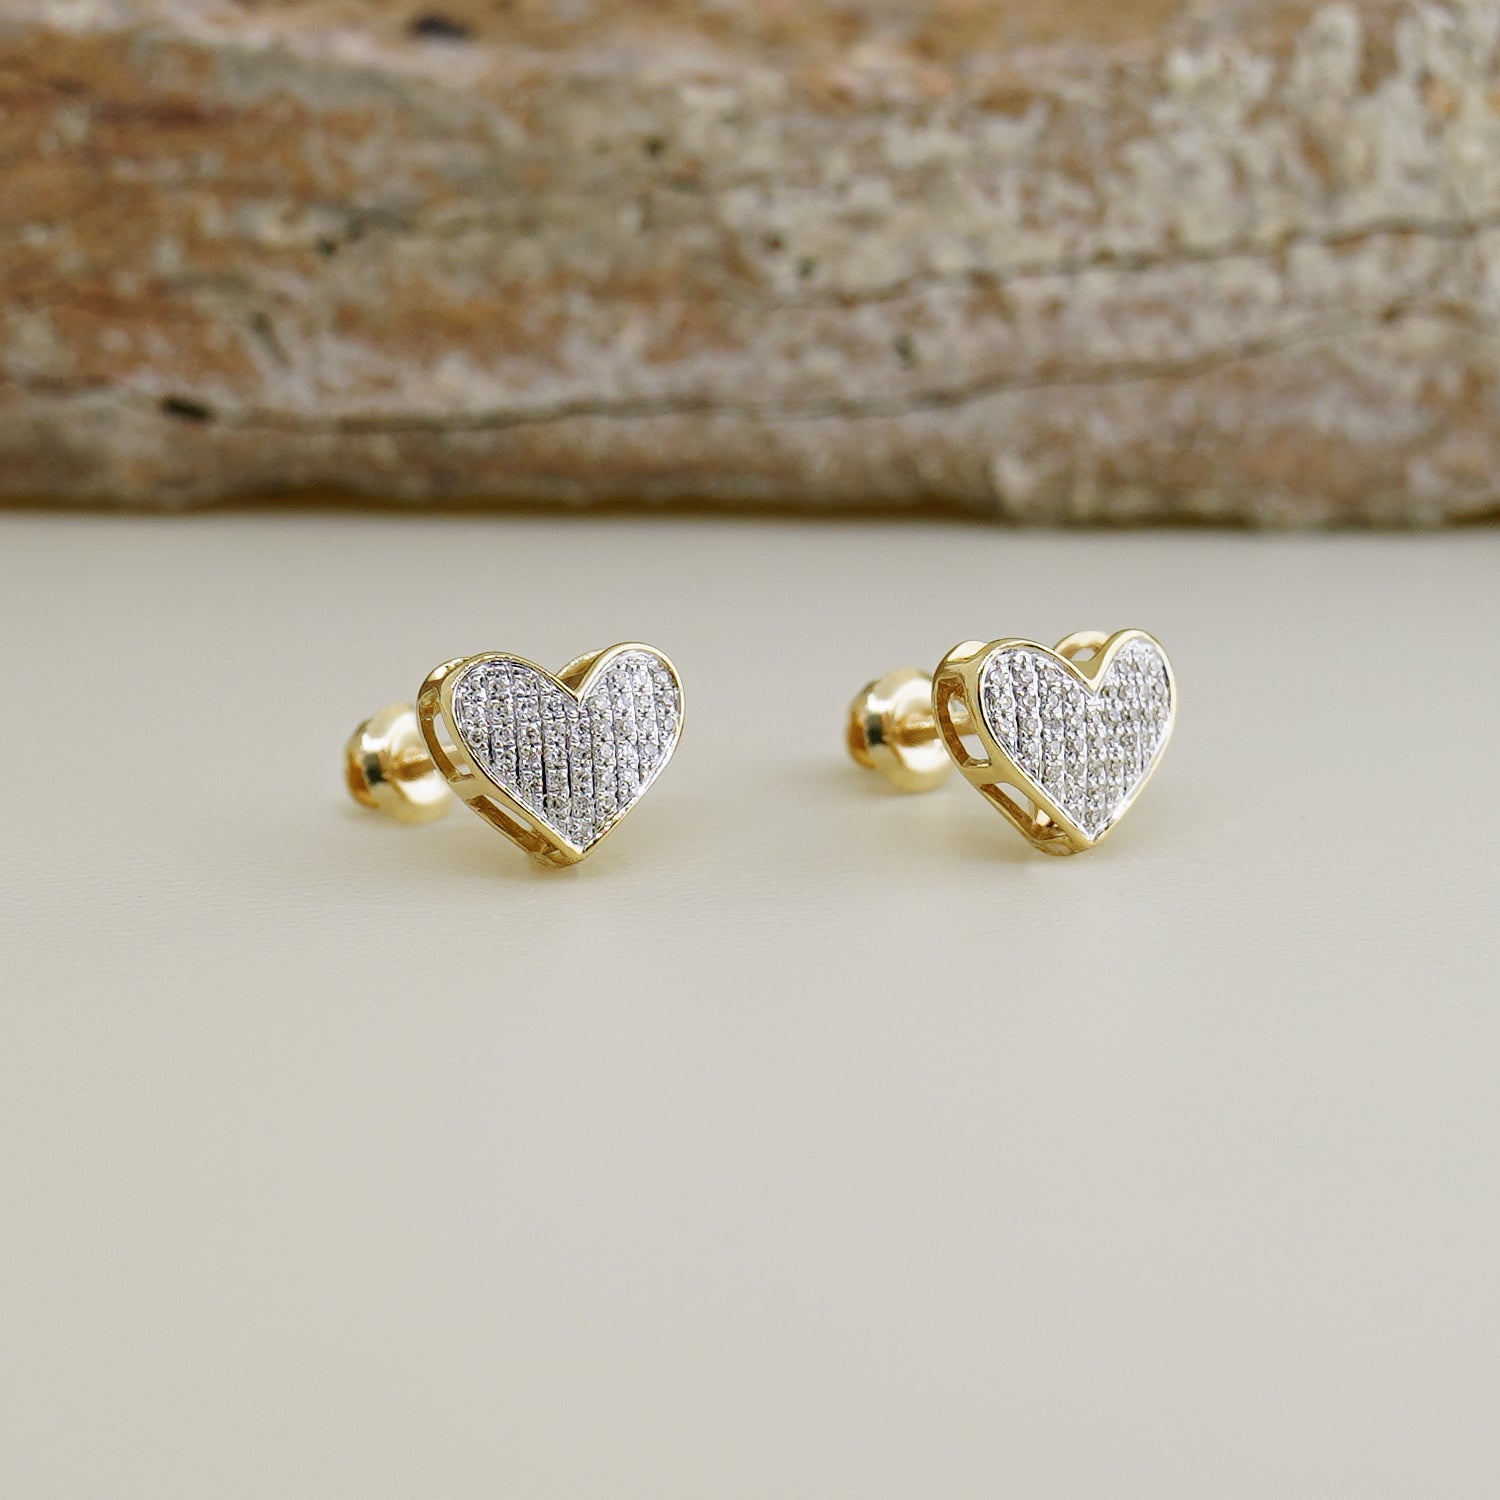 14K Solid Gold Diamond Heart Earrings - anygolds